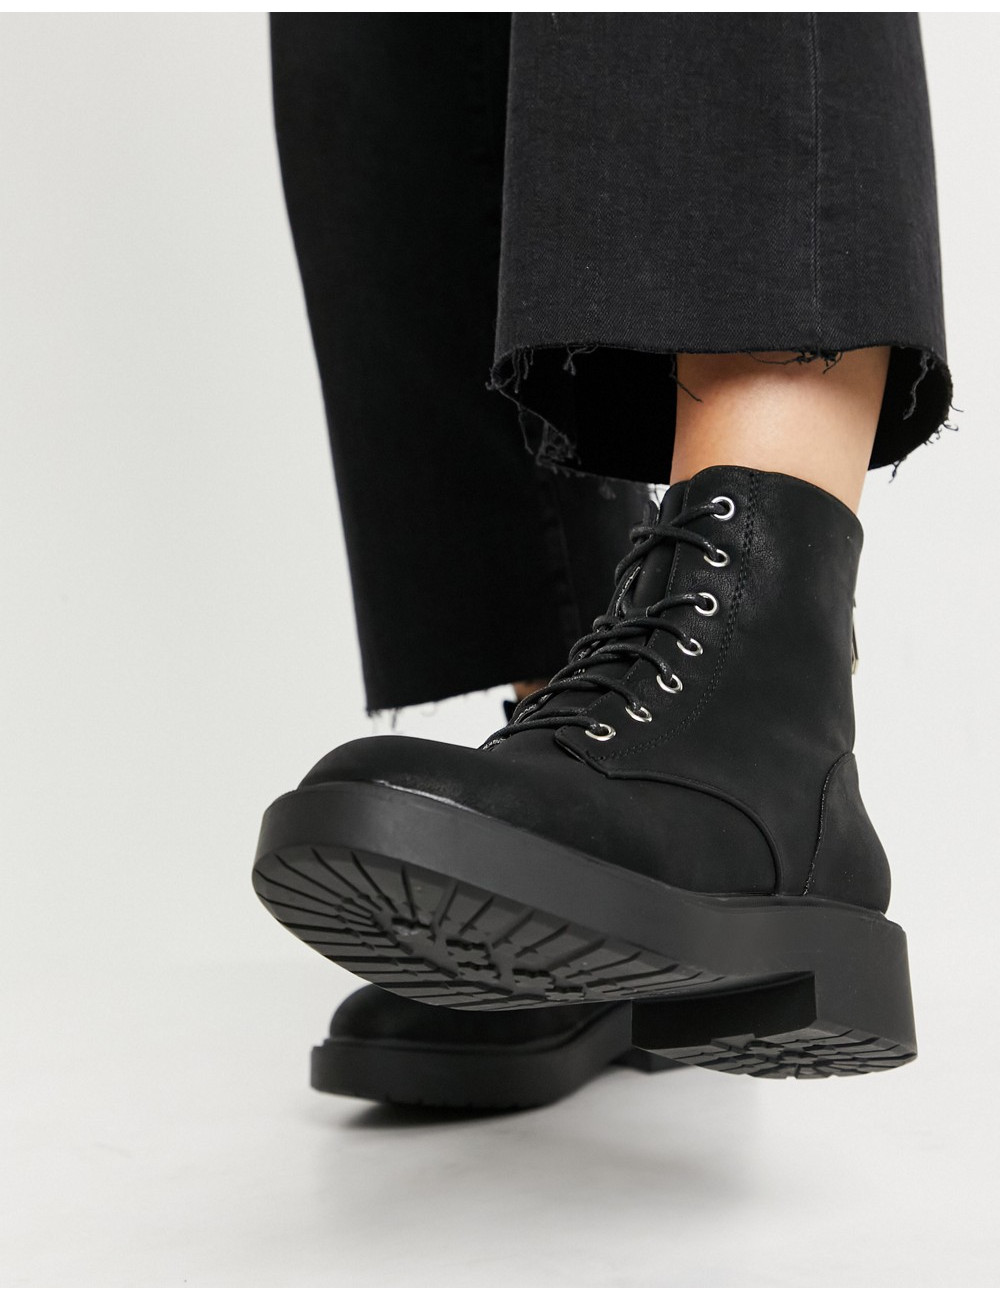 New Look lace up biker boot...